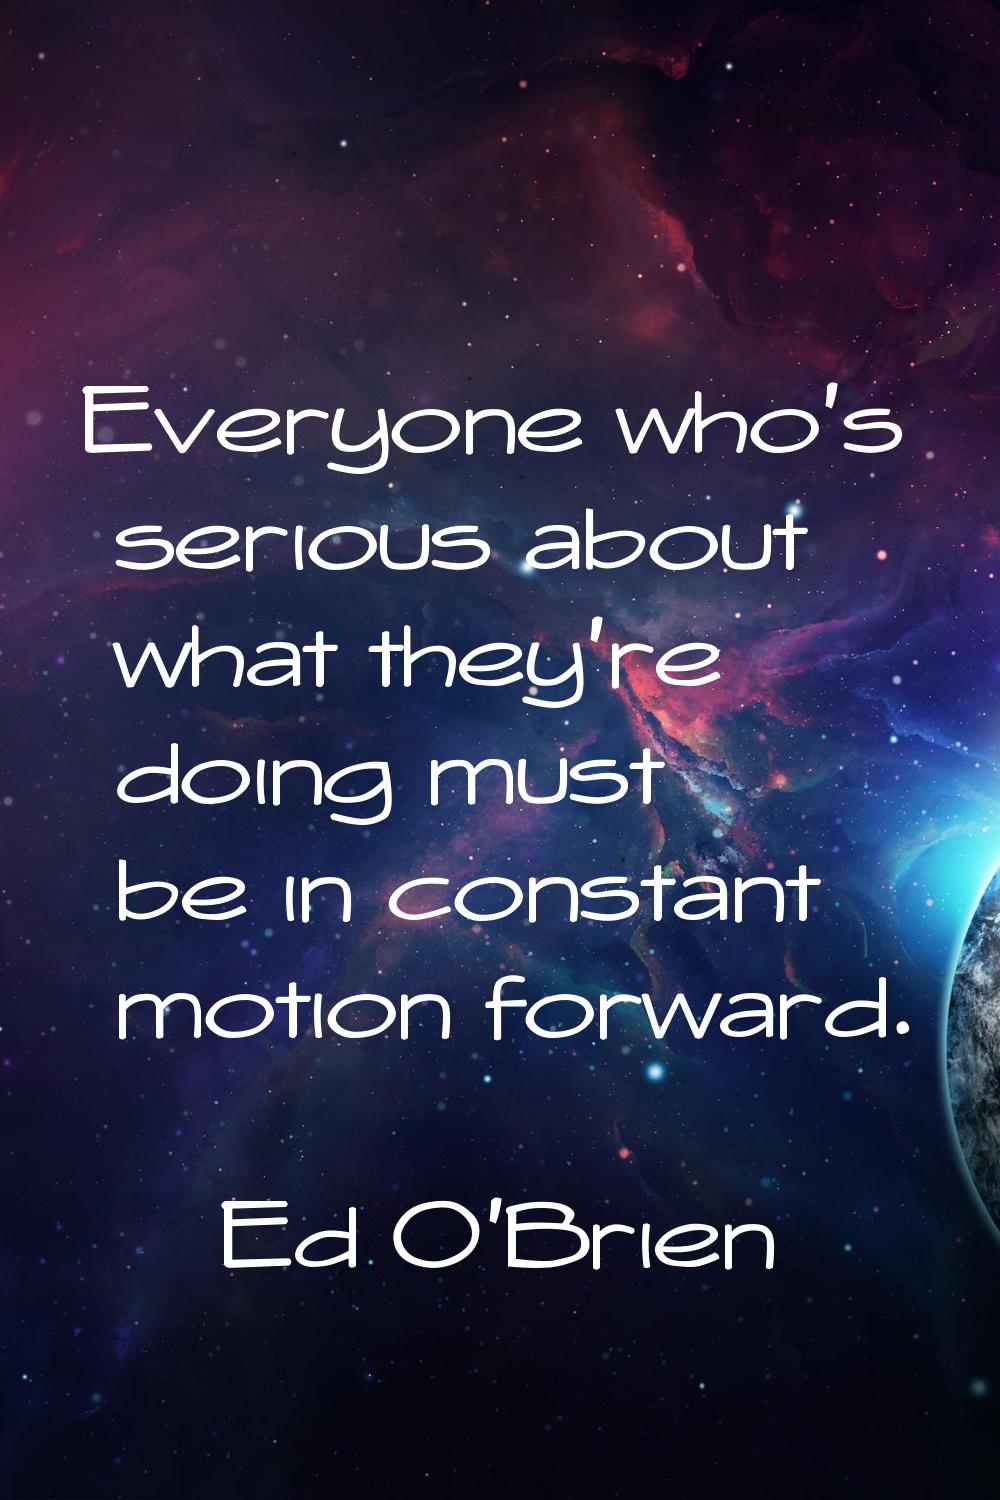 Everyone who's serious about what they're doing must be in constant motion forward.